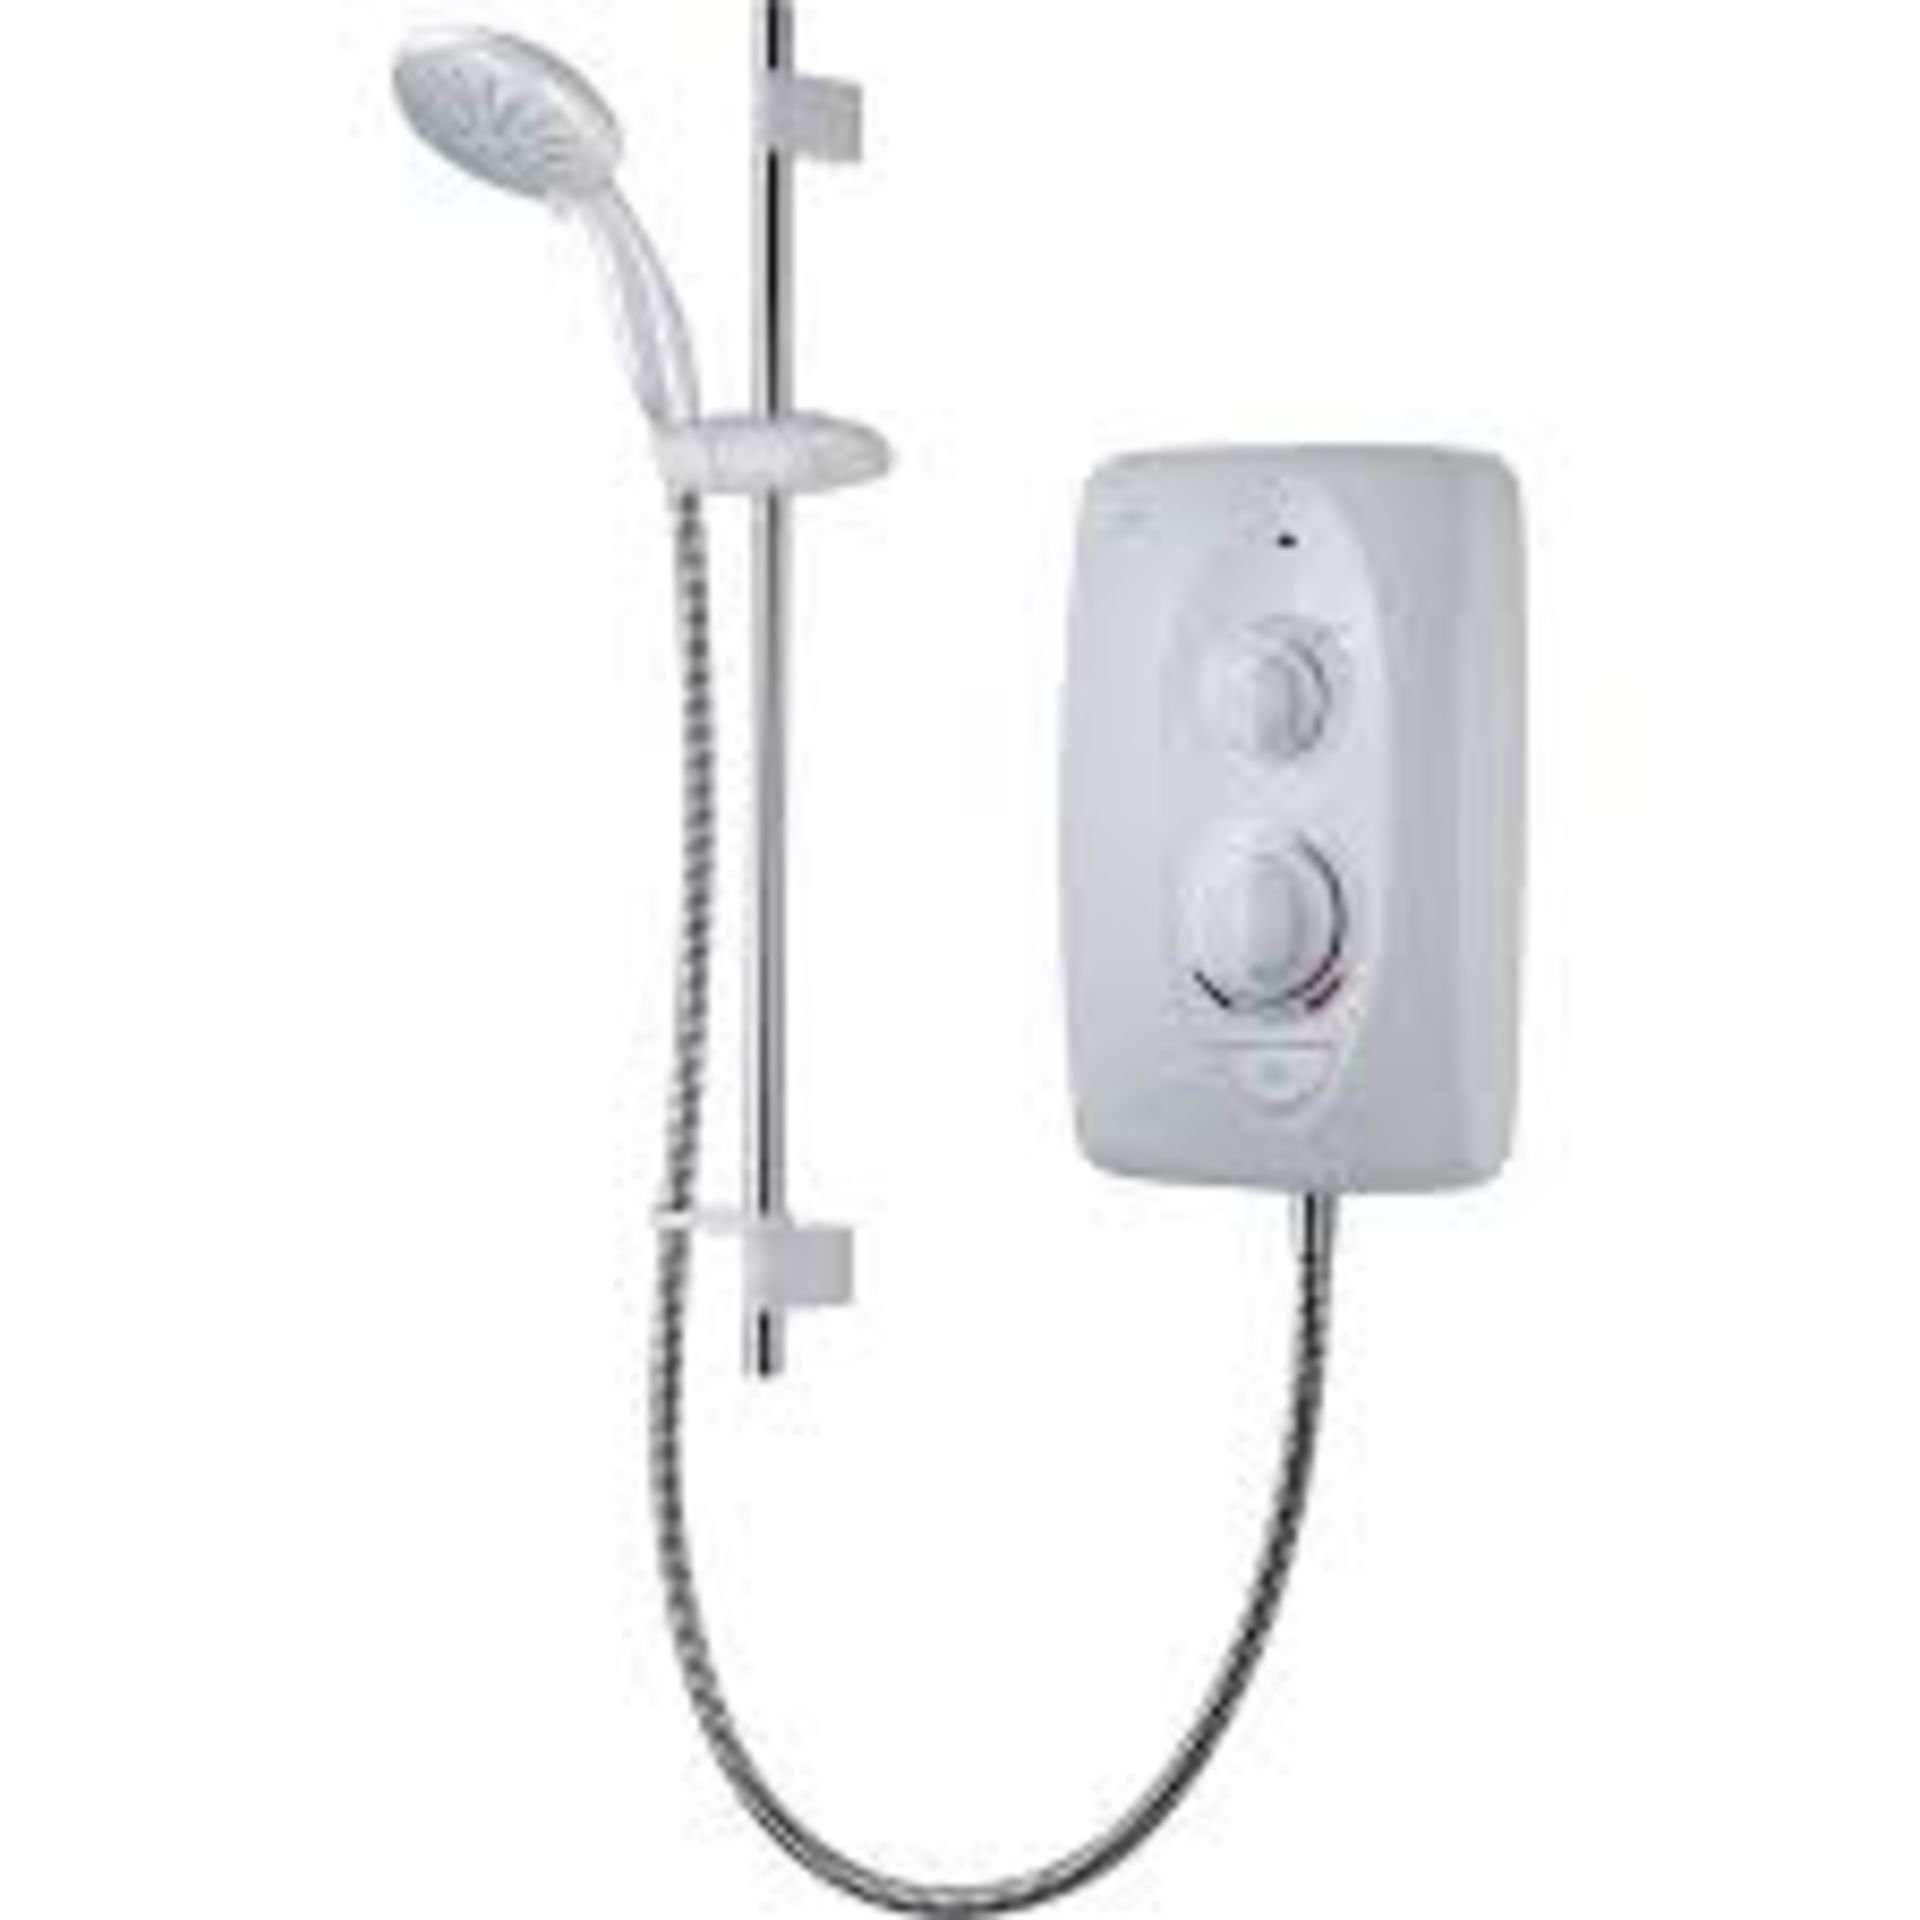 Mira Sprint Gloss White Manual Electric Shower, 9.5kW. - R10BW. With its multiple water and cable